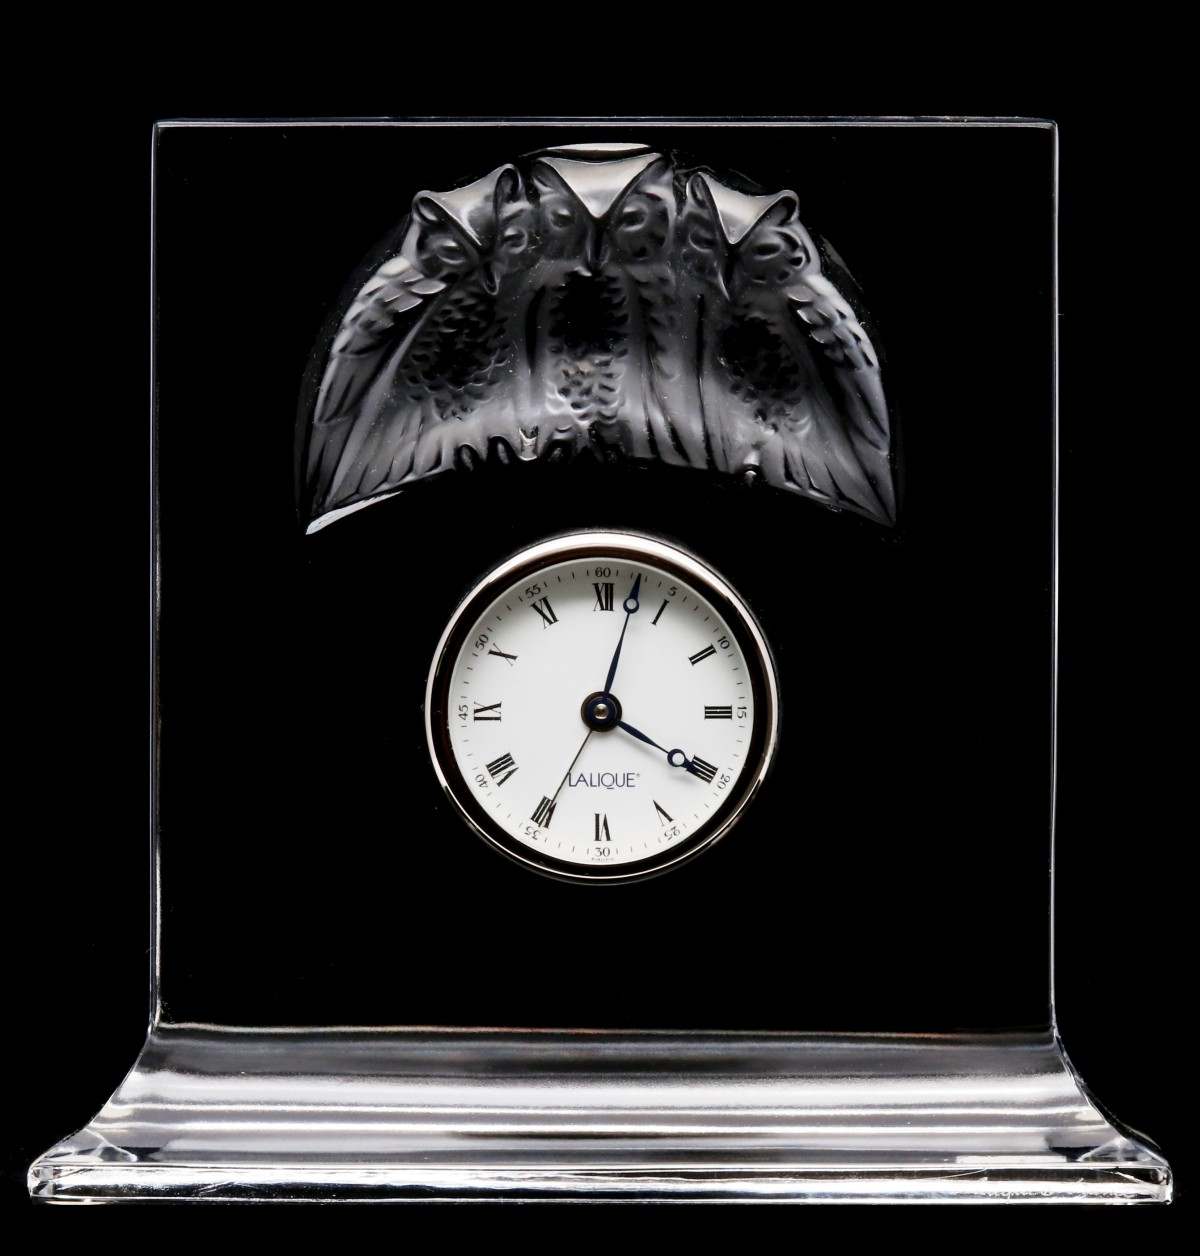 A LALIQUE FRENCH CRYSTAL CLOCK WITH FROSTED OWLS